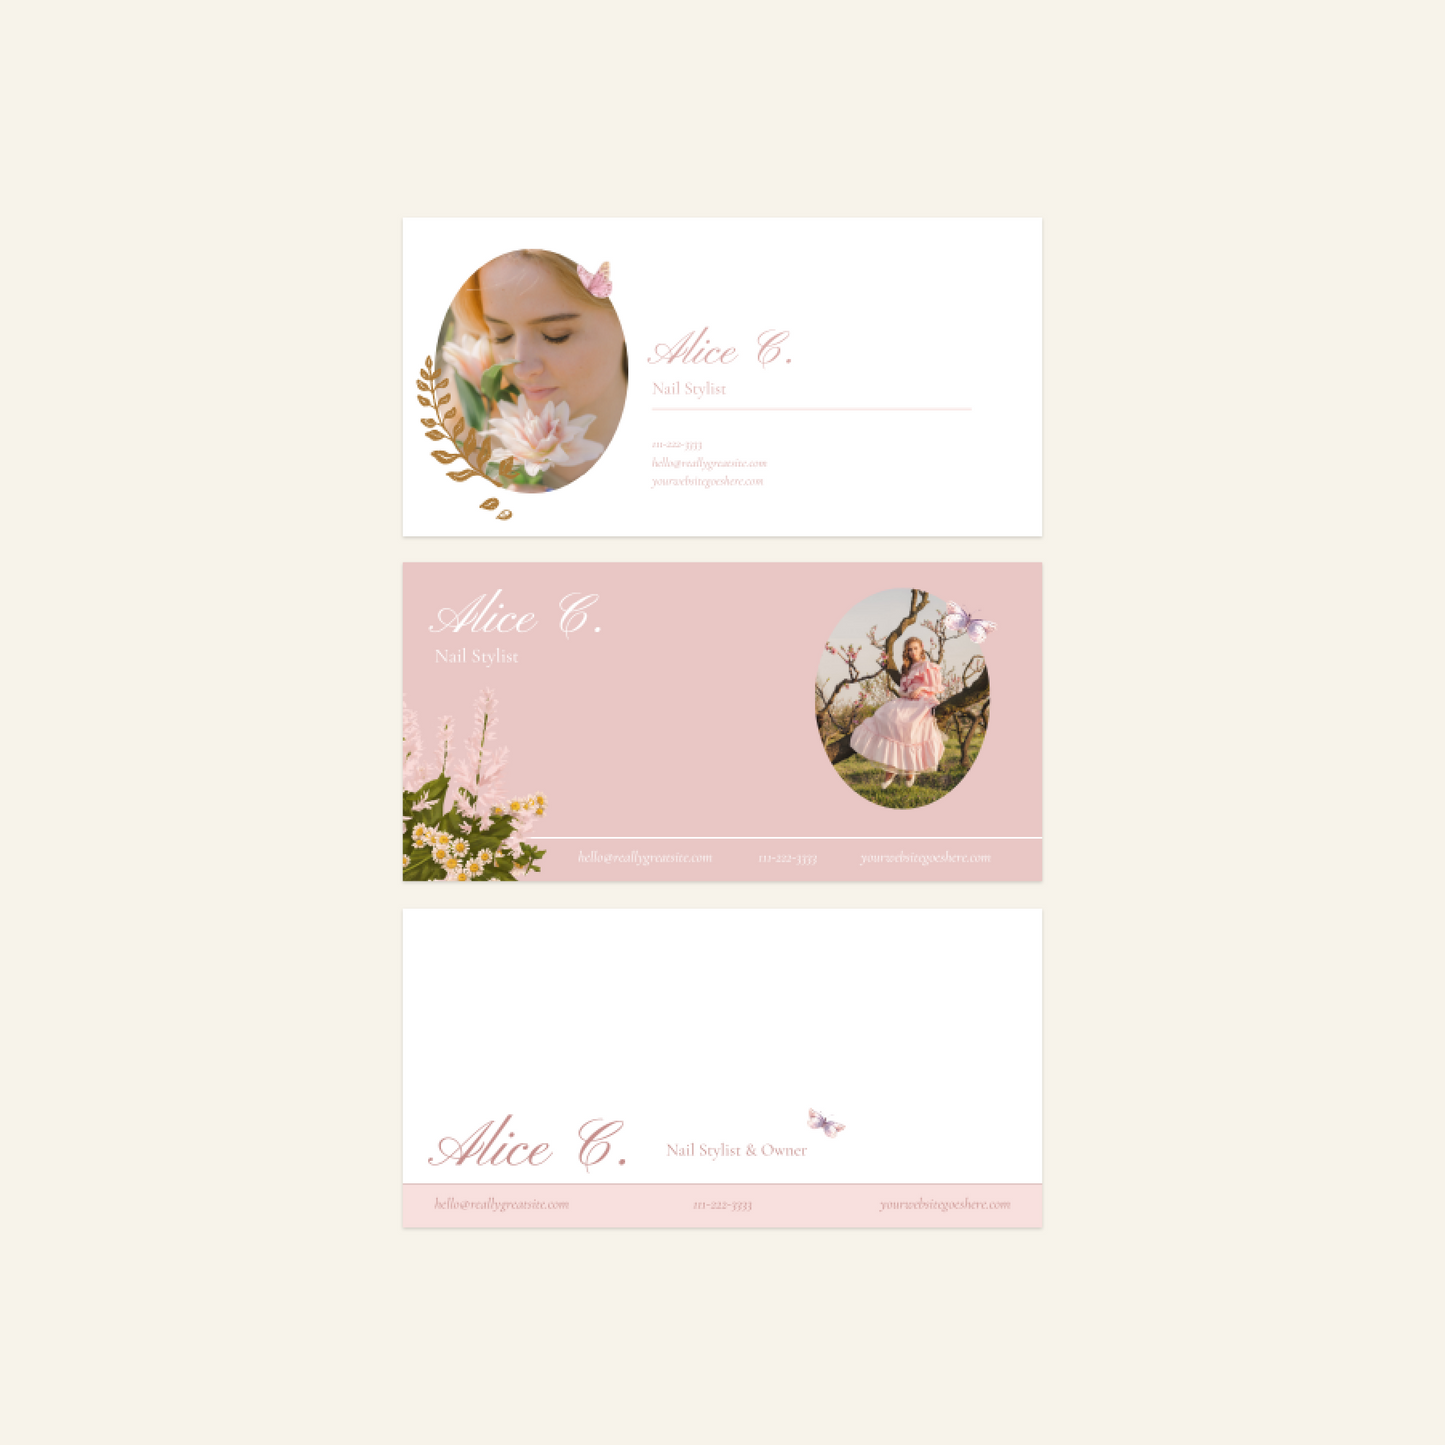 Alice & Evelyn - Email Signature Template